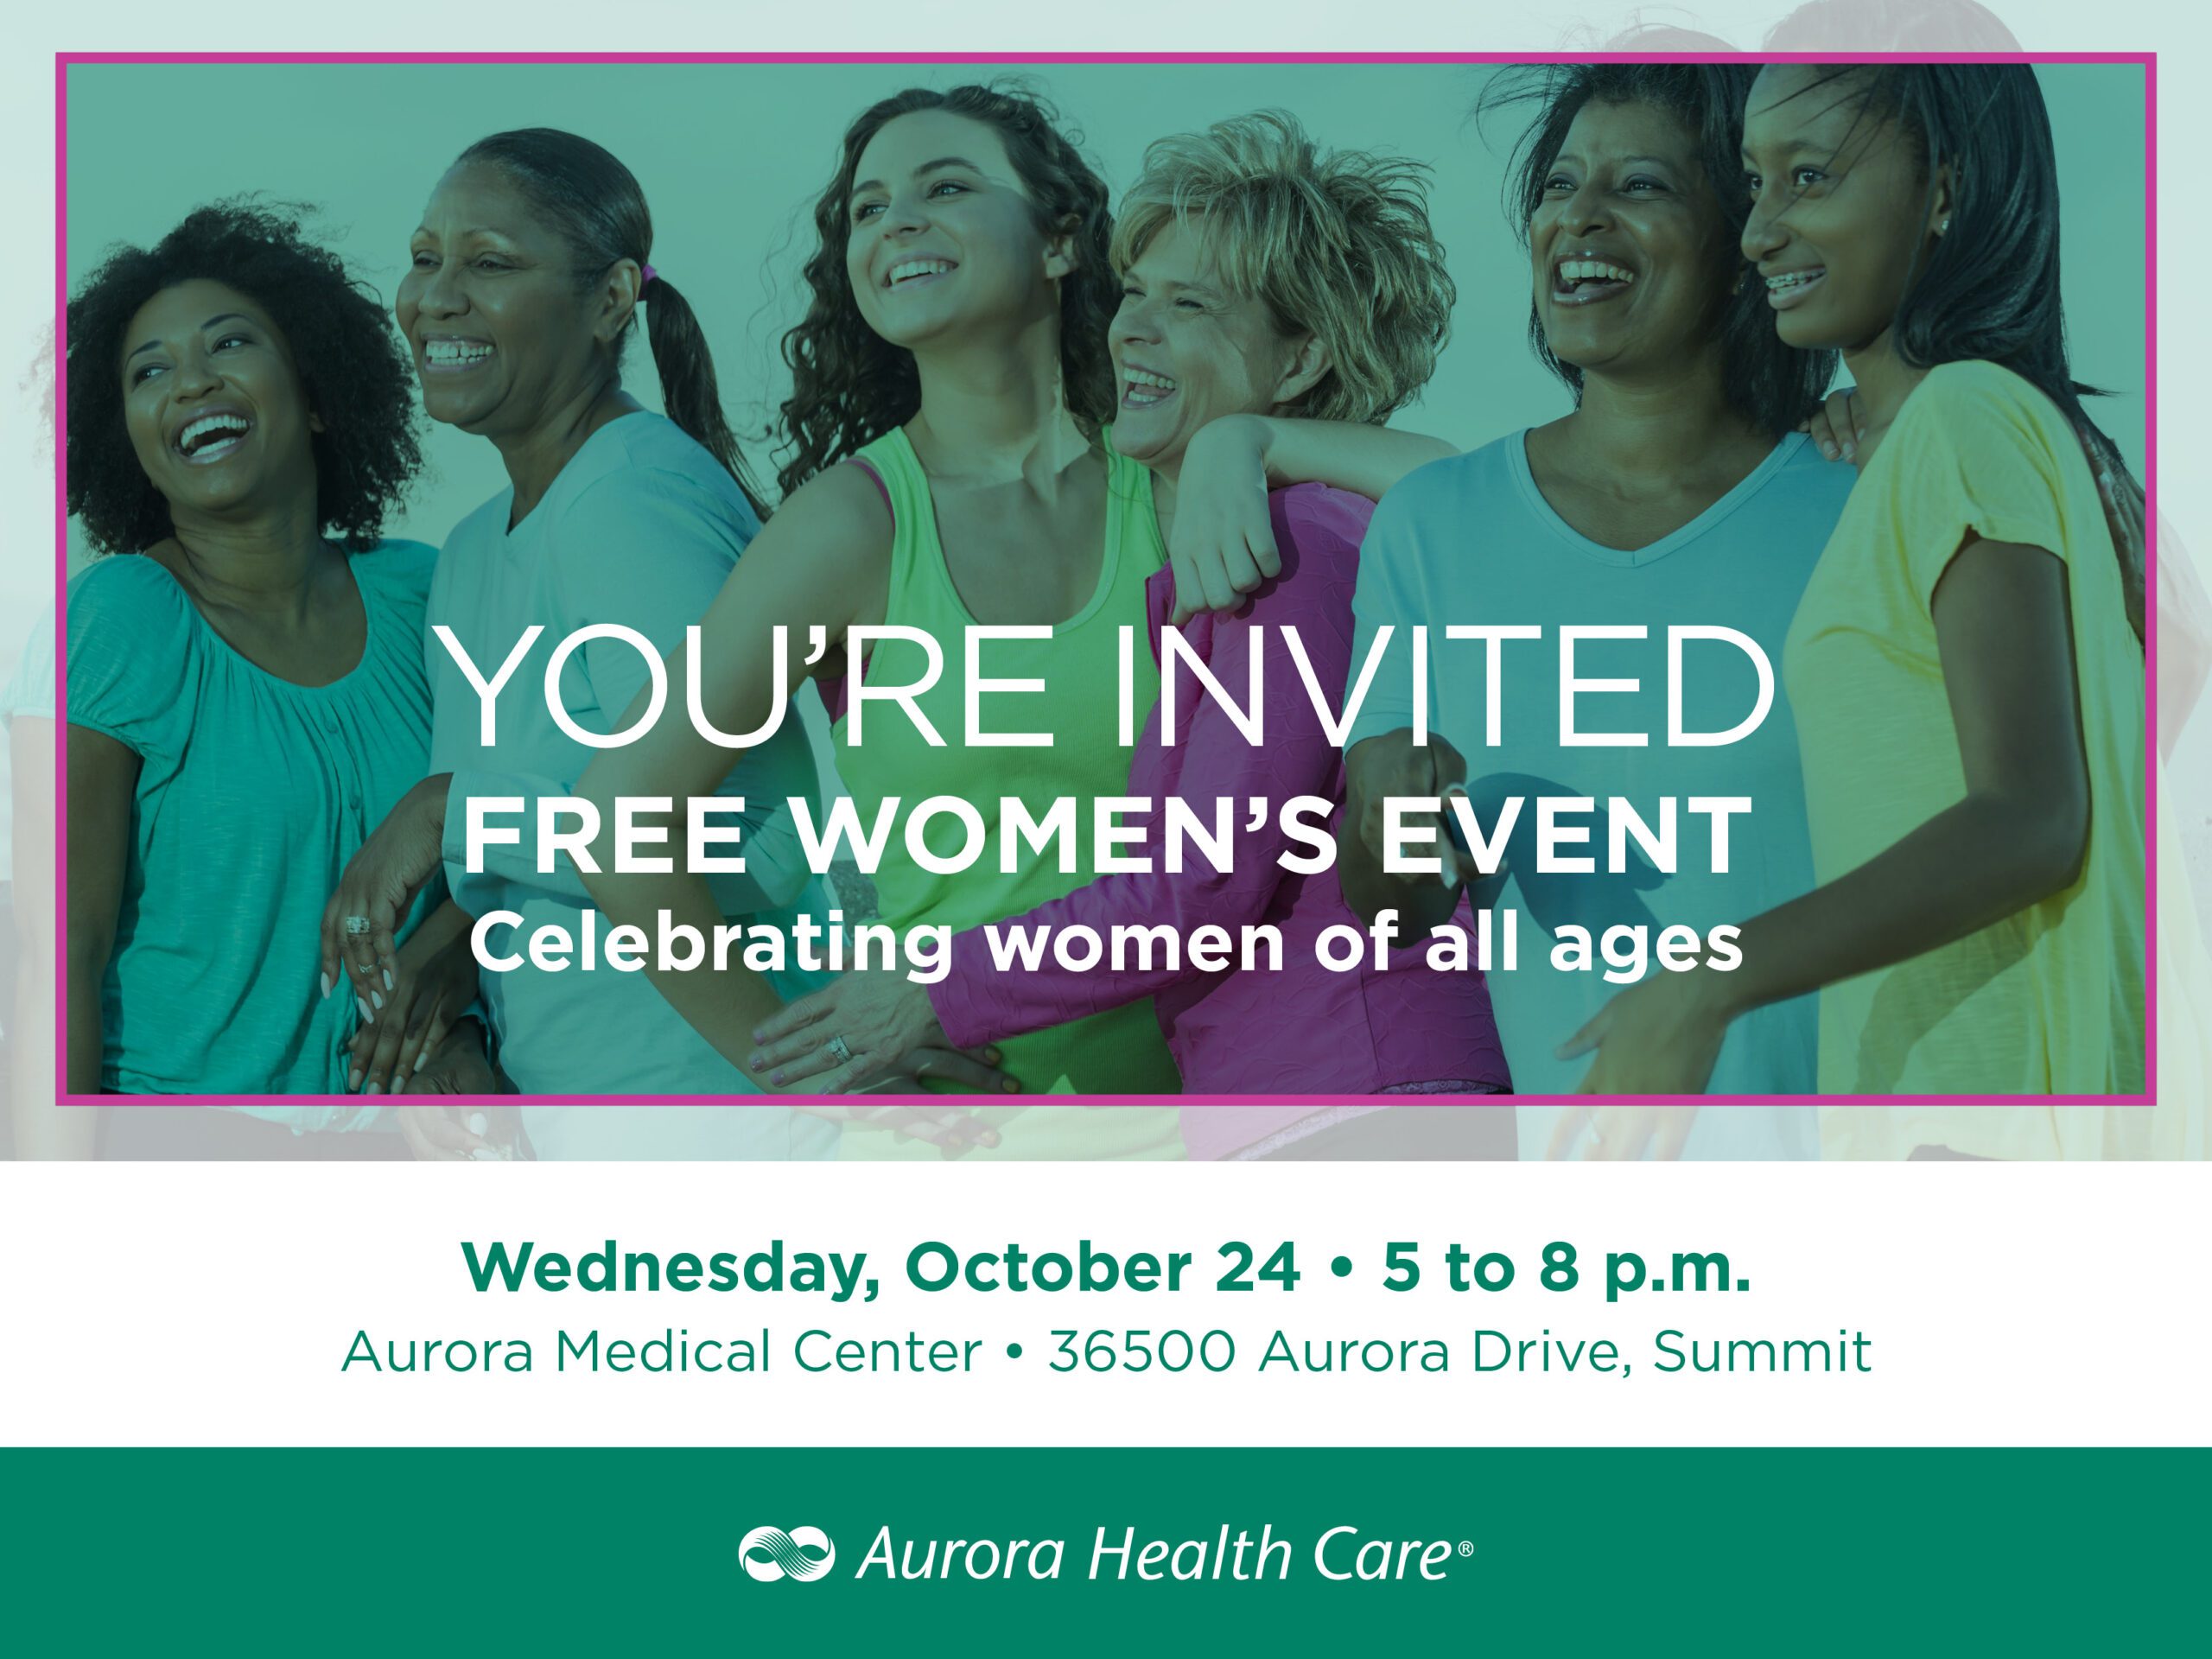 Ladies night out, embracing you! A FREE Women’s Event at Aurora Summit